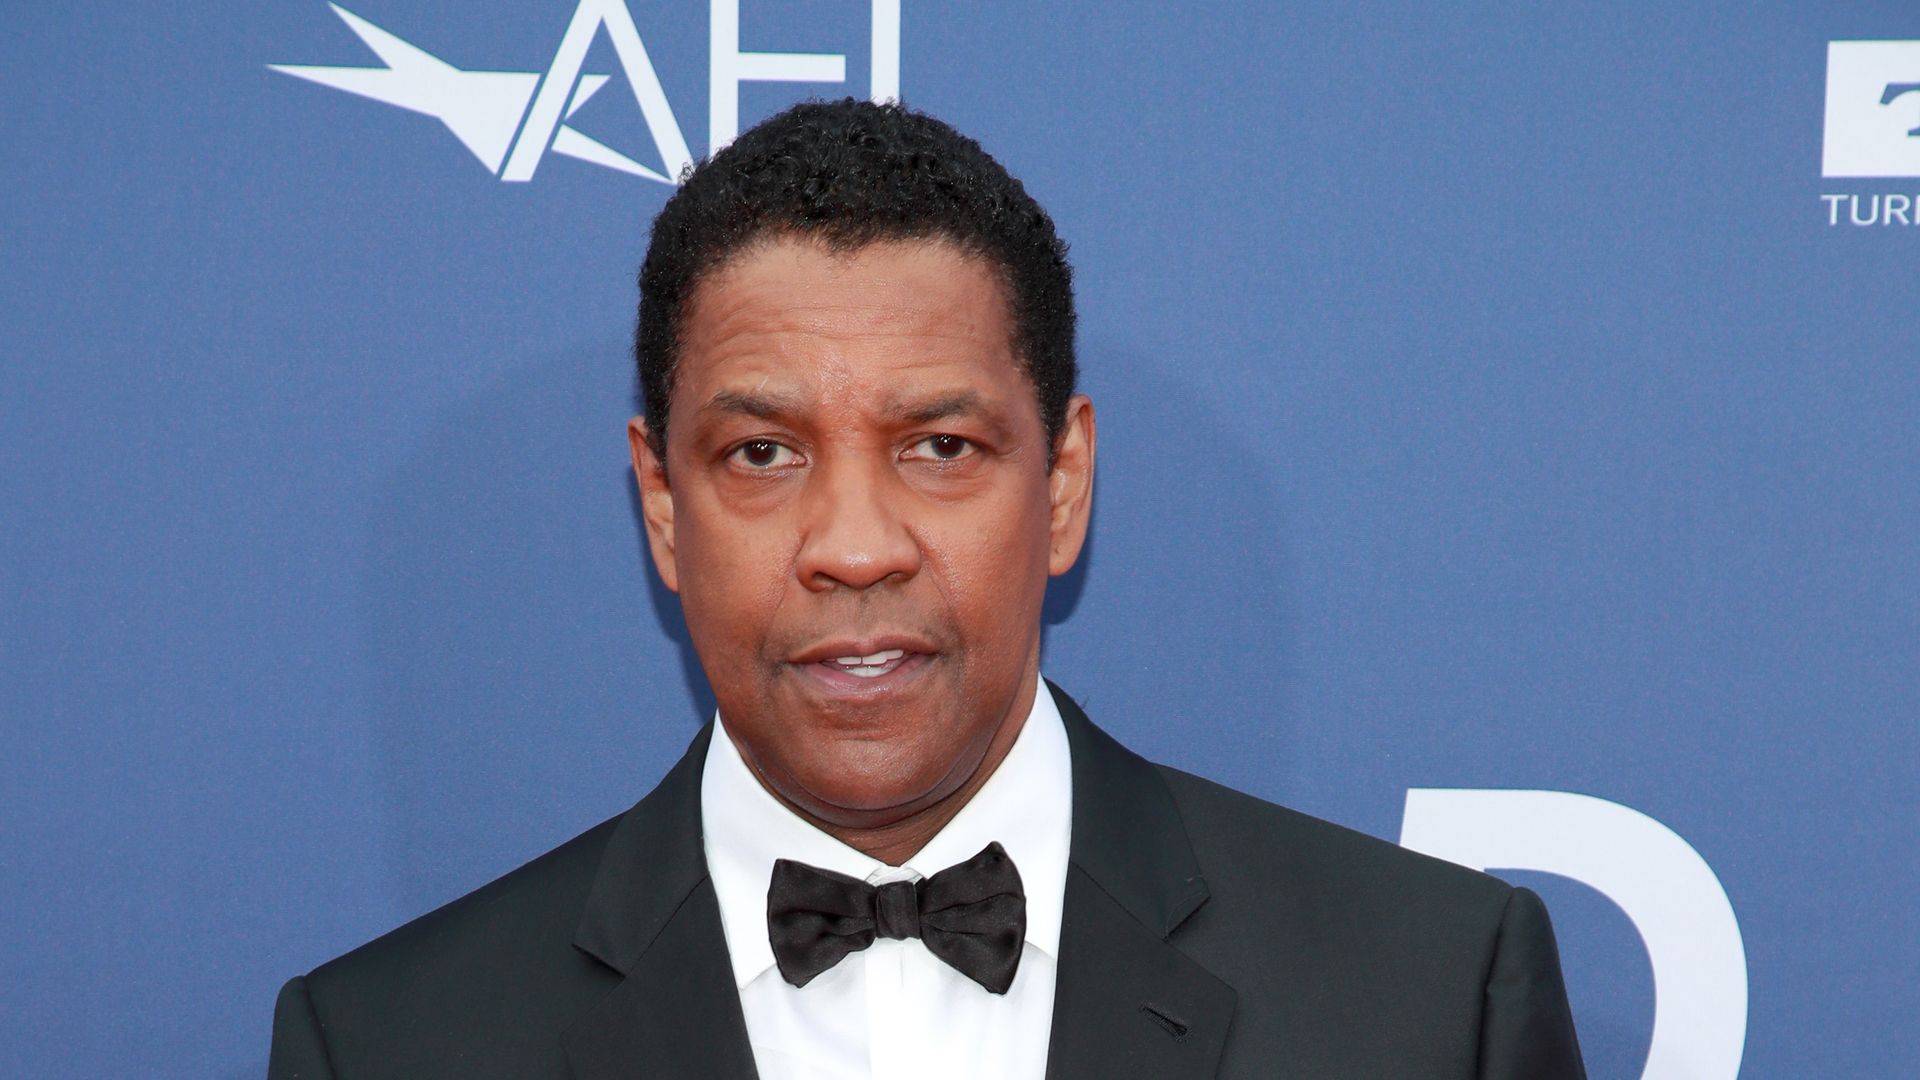 Denzel Washington attends the 47th AFI Life Achievement Award honoring Denzel Washington at Dolby Theatre on June 06, 2019 in Hollywood, California